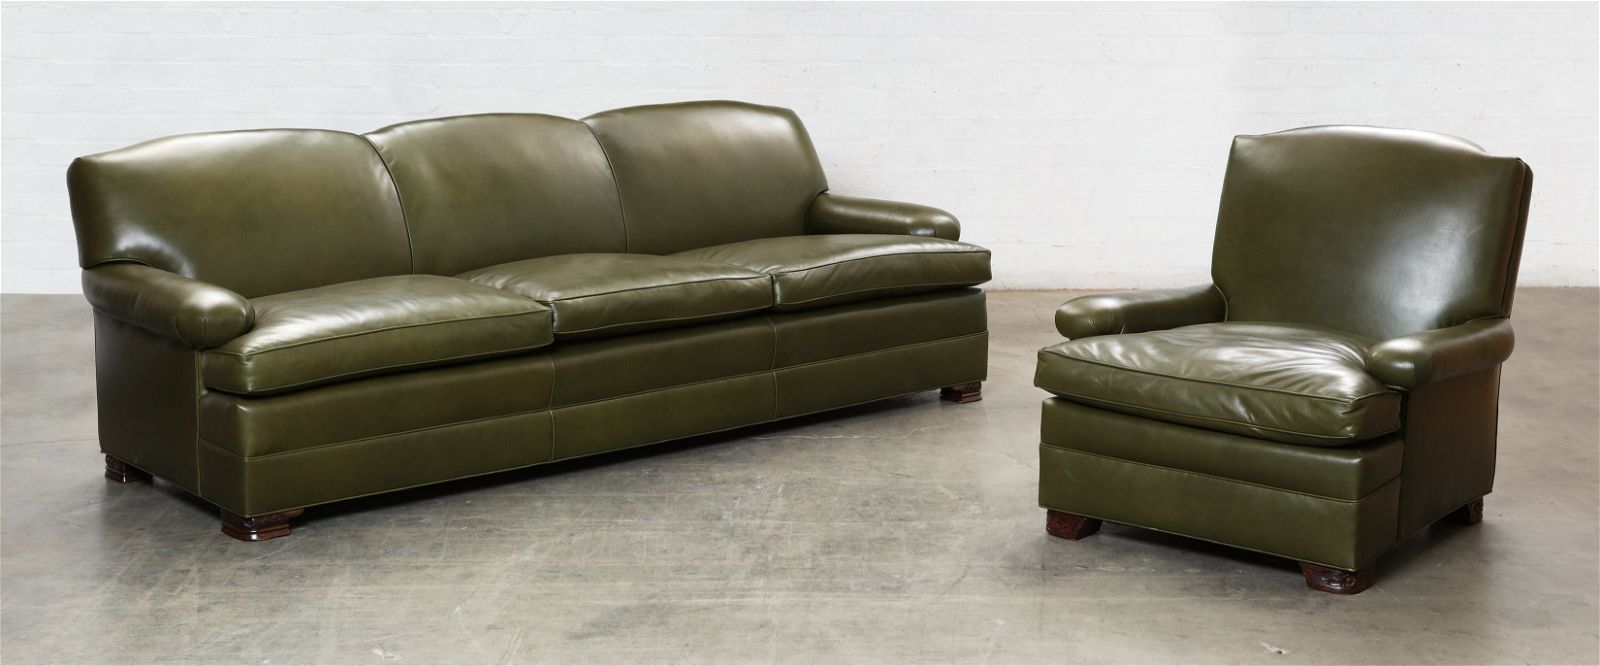 A GREEN LEATHER UPHOLSTERED SOFA